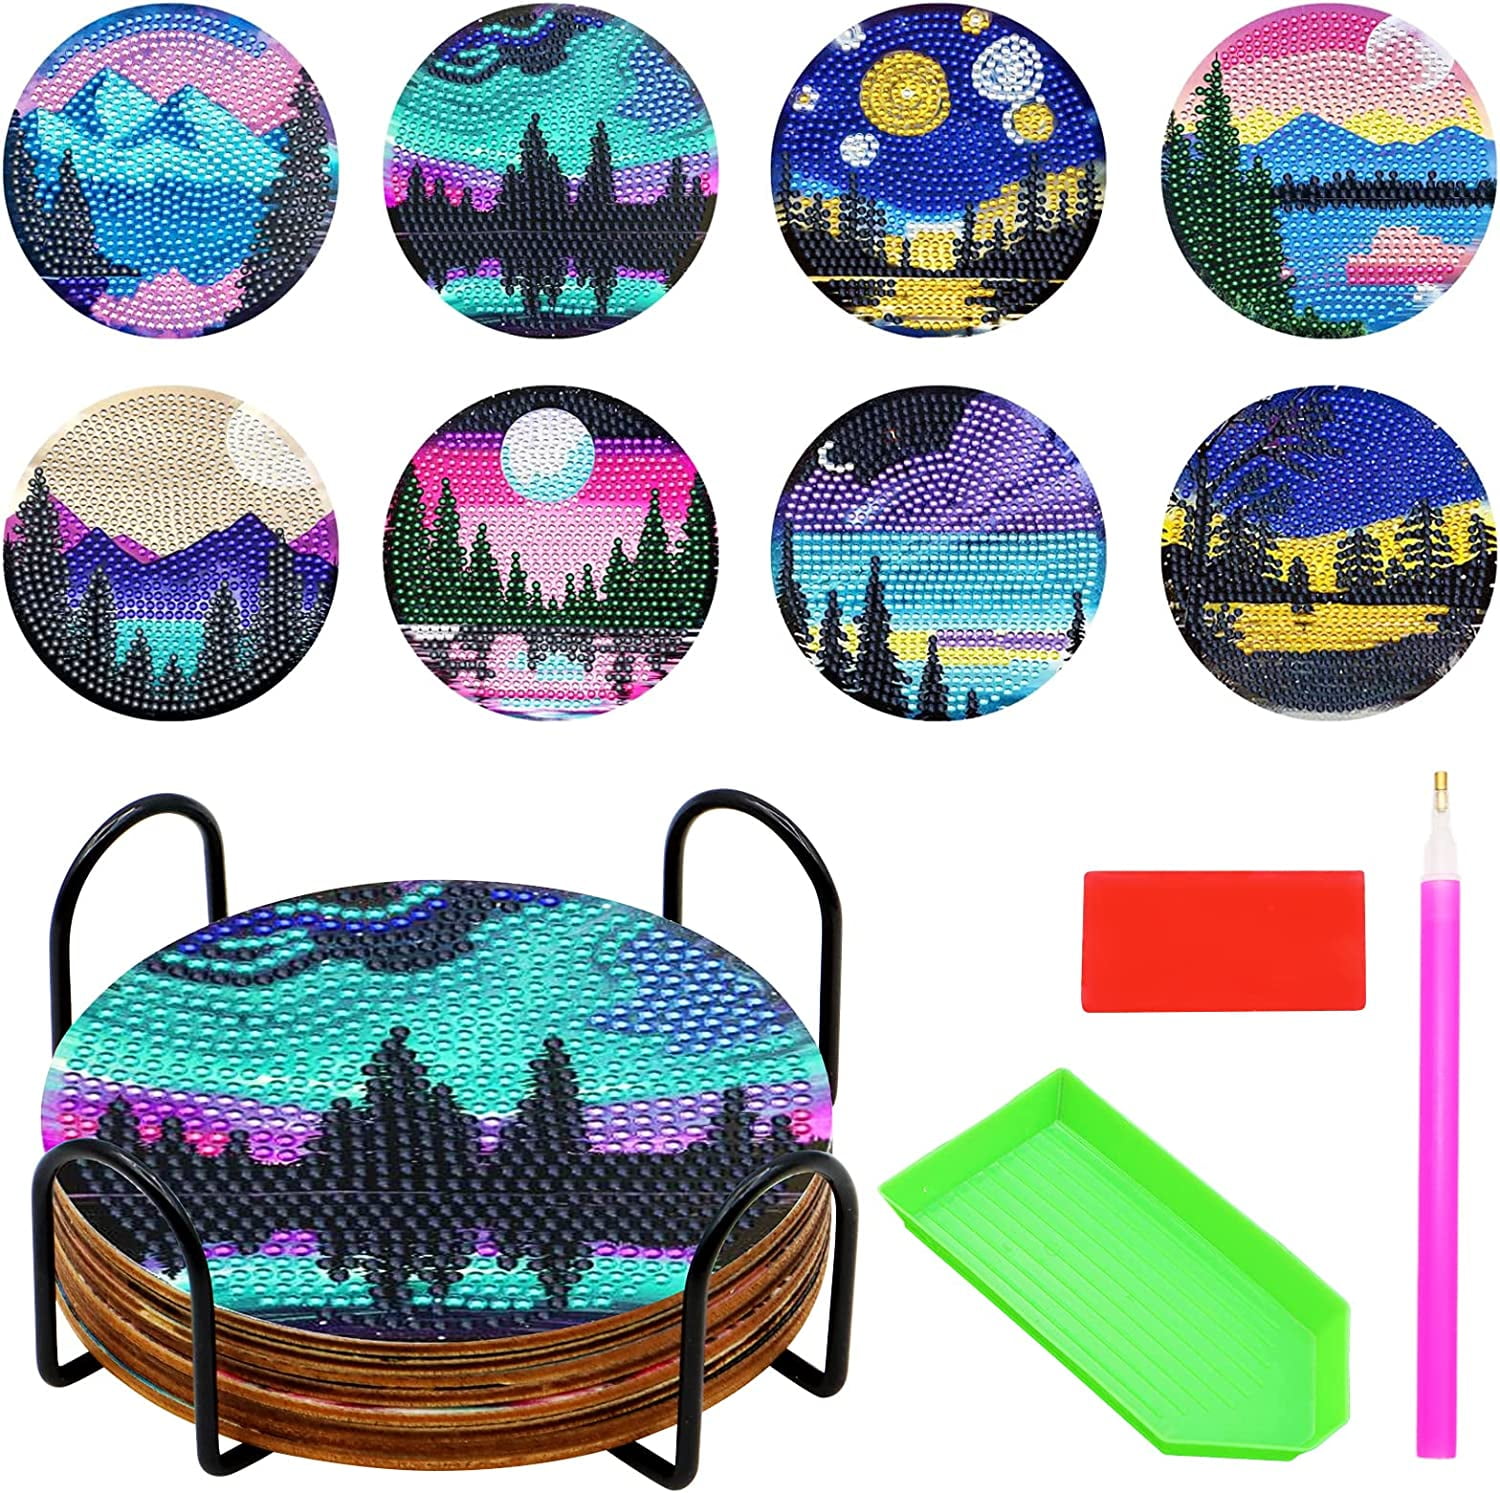 RICUVED 8 Pcs Diamond Painting Coasters with Holder, DIY Coasters Mouse  Diamond Painting Coaster Kits for Beginners Adults Cartoon Diamond Art